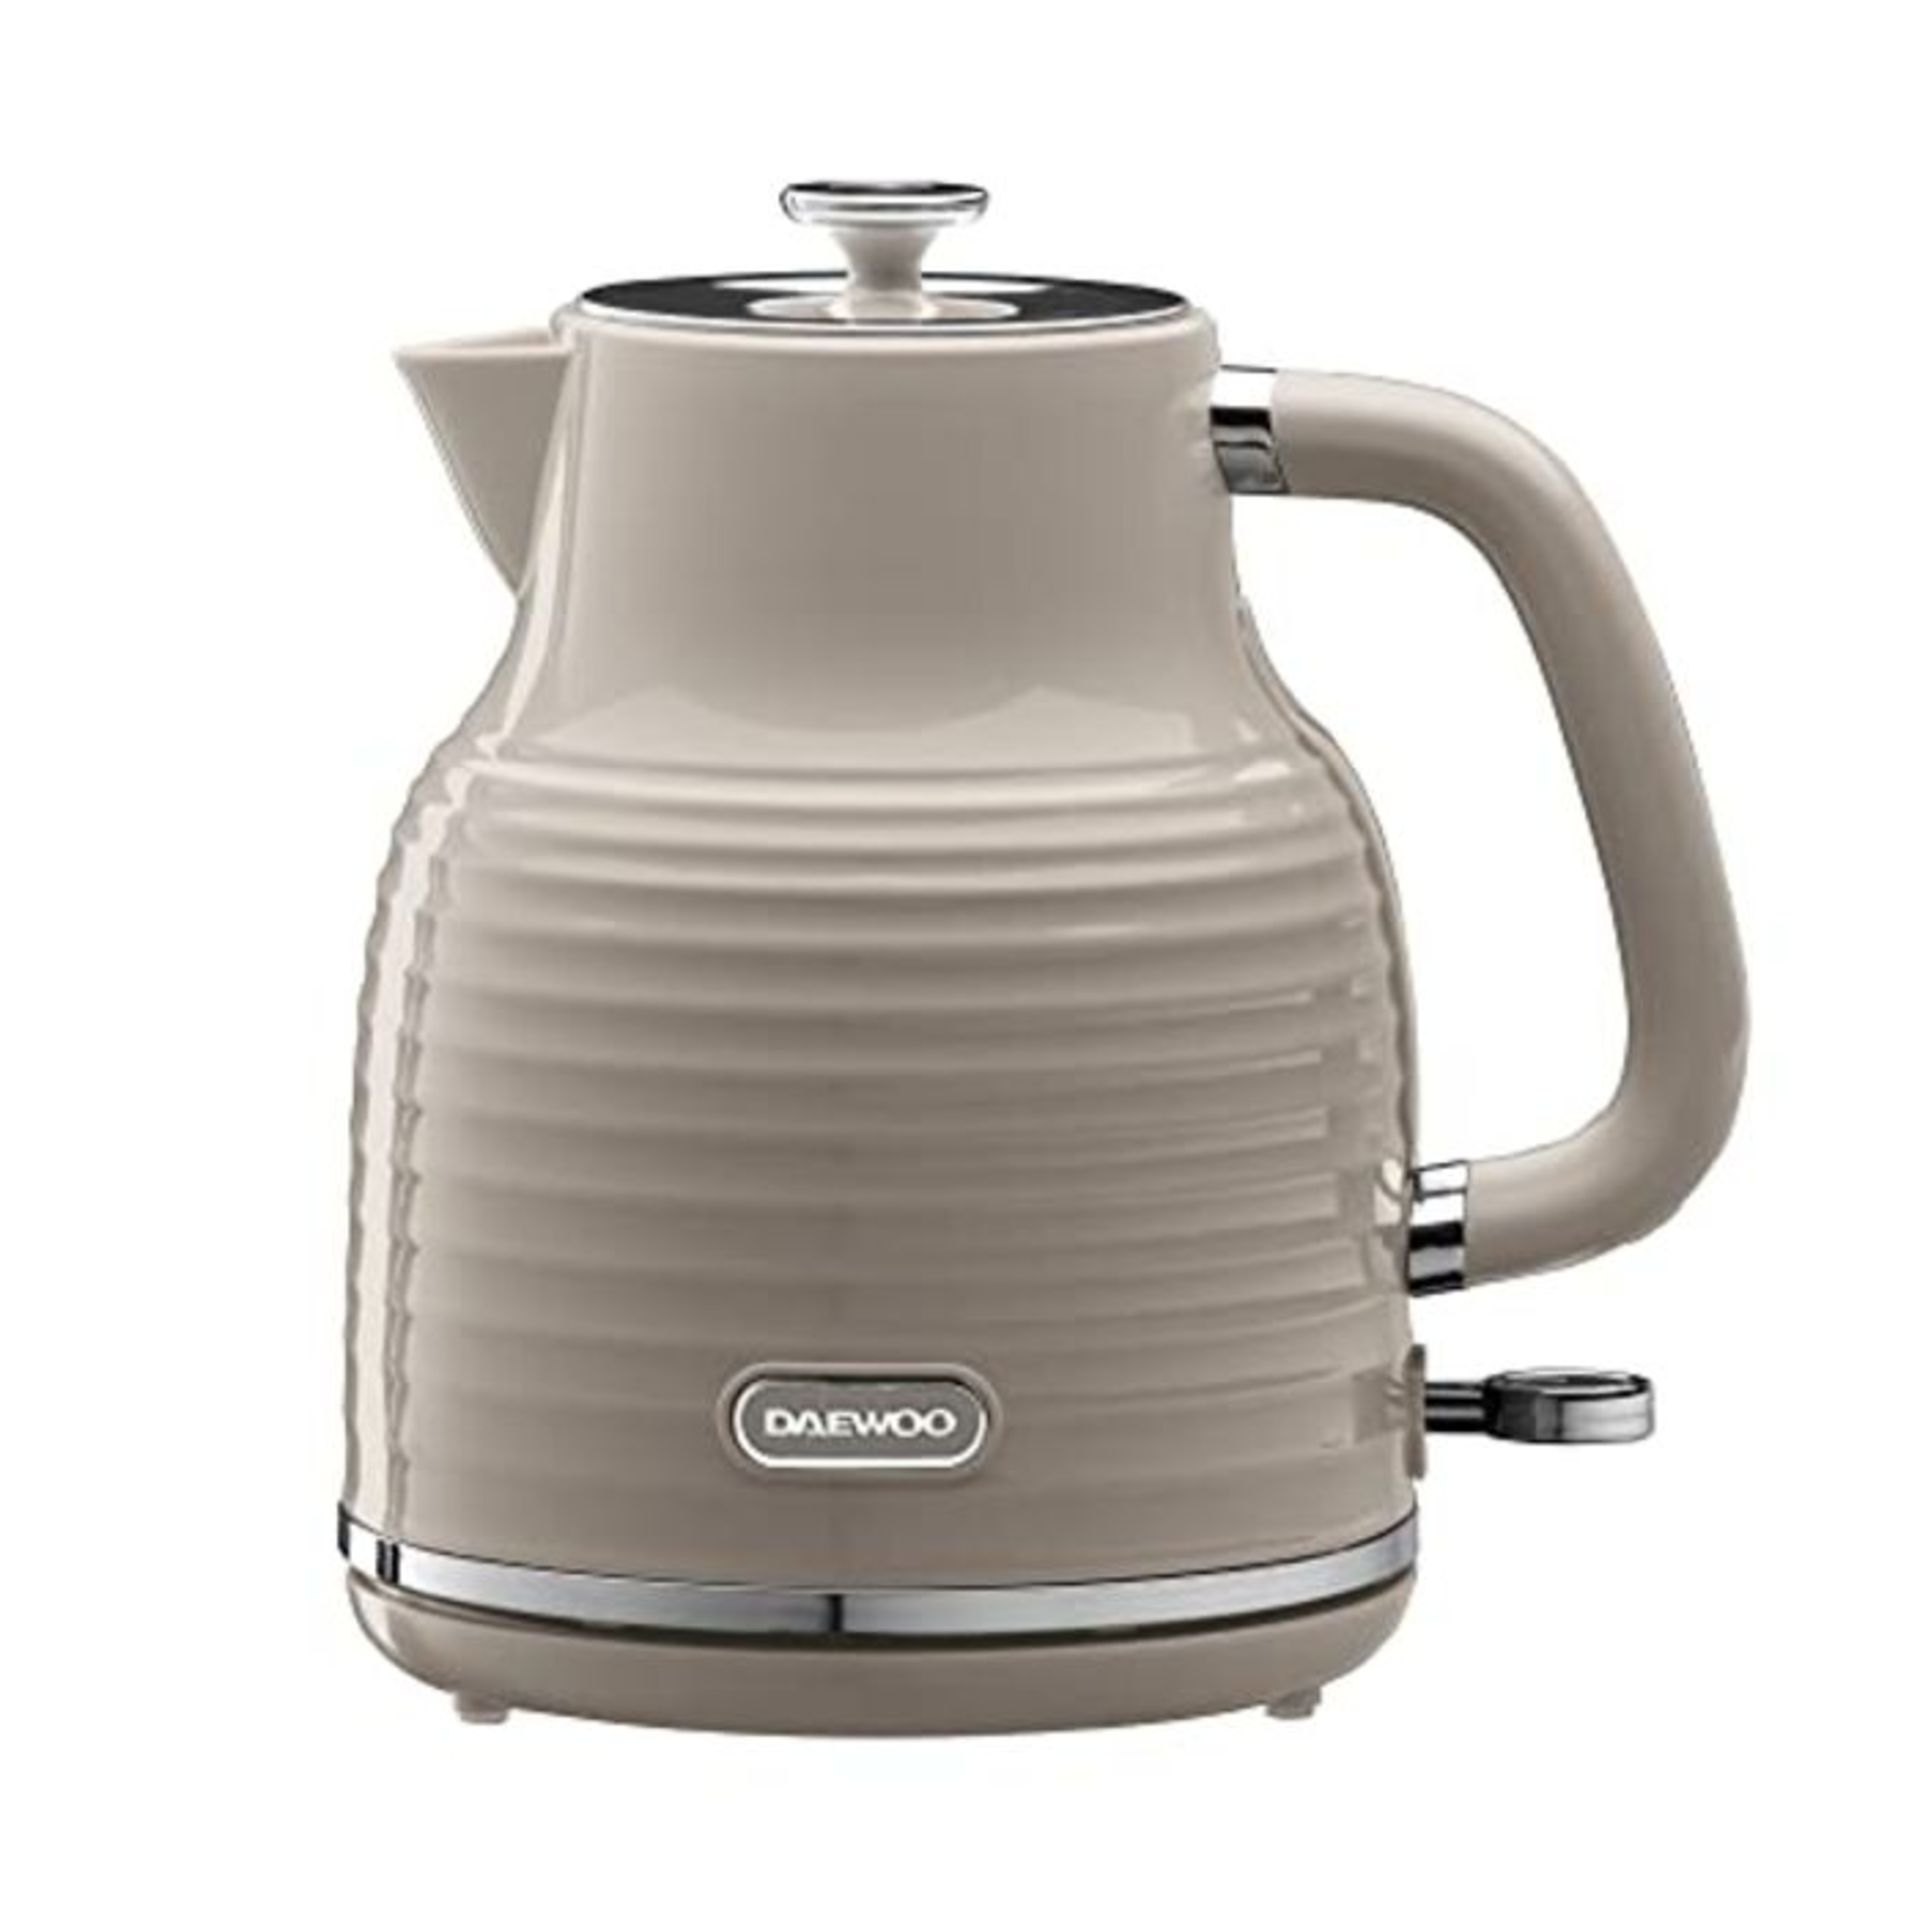 Daewoo Sienna Collection Jug Kettle, Family Sized 1.7 Litre Capacity, Fast Boil, Easy